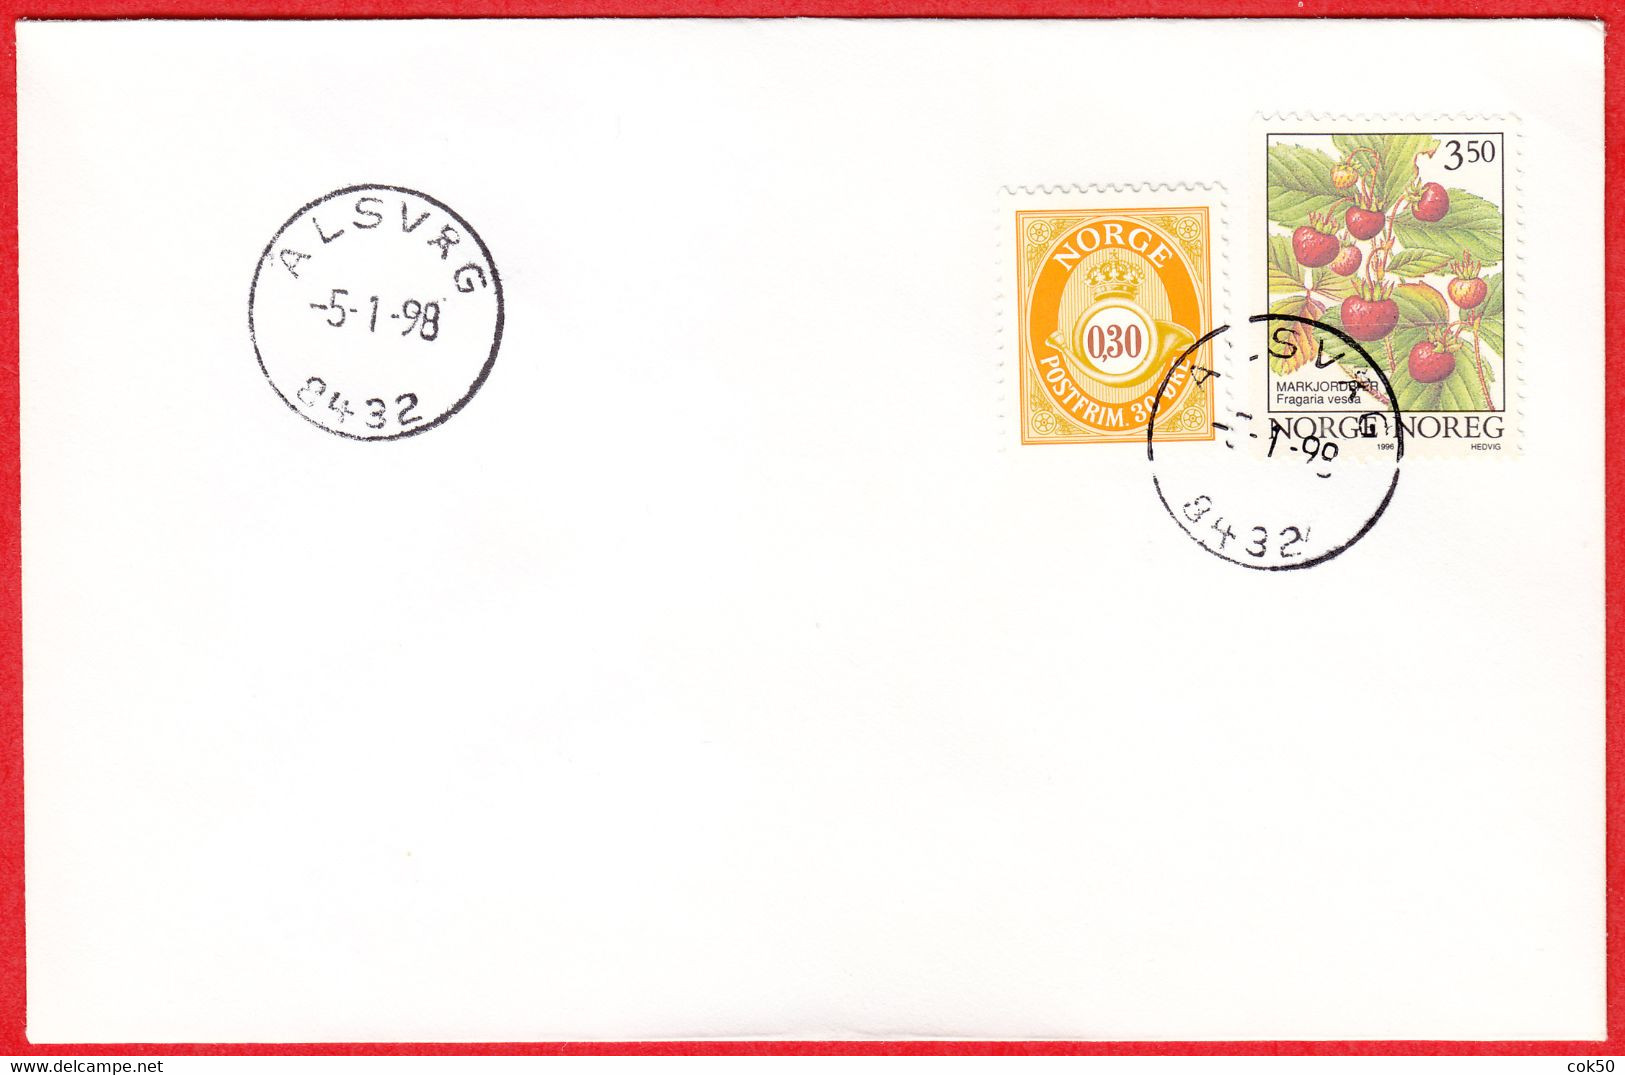 NORWAY -  8432 ALSVÅG (Nordland County) - Last Day/postoffice Closed On 1998.01.05 - Local Post Stamps